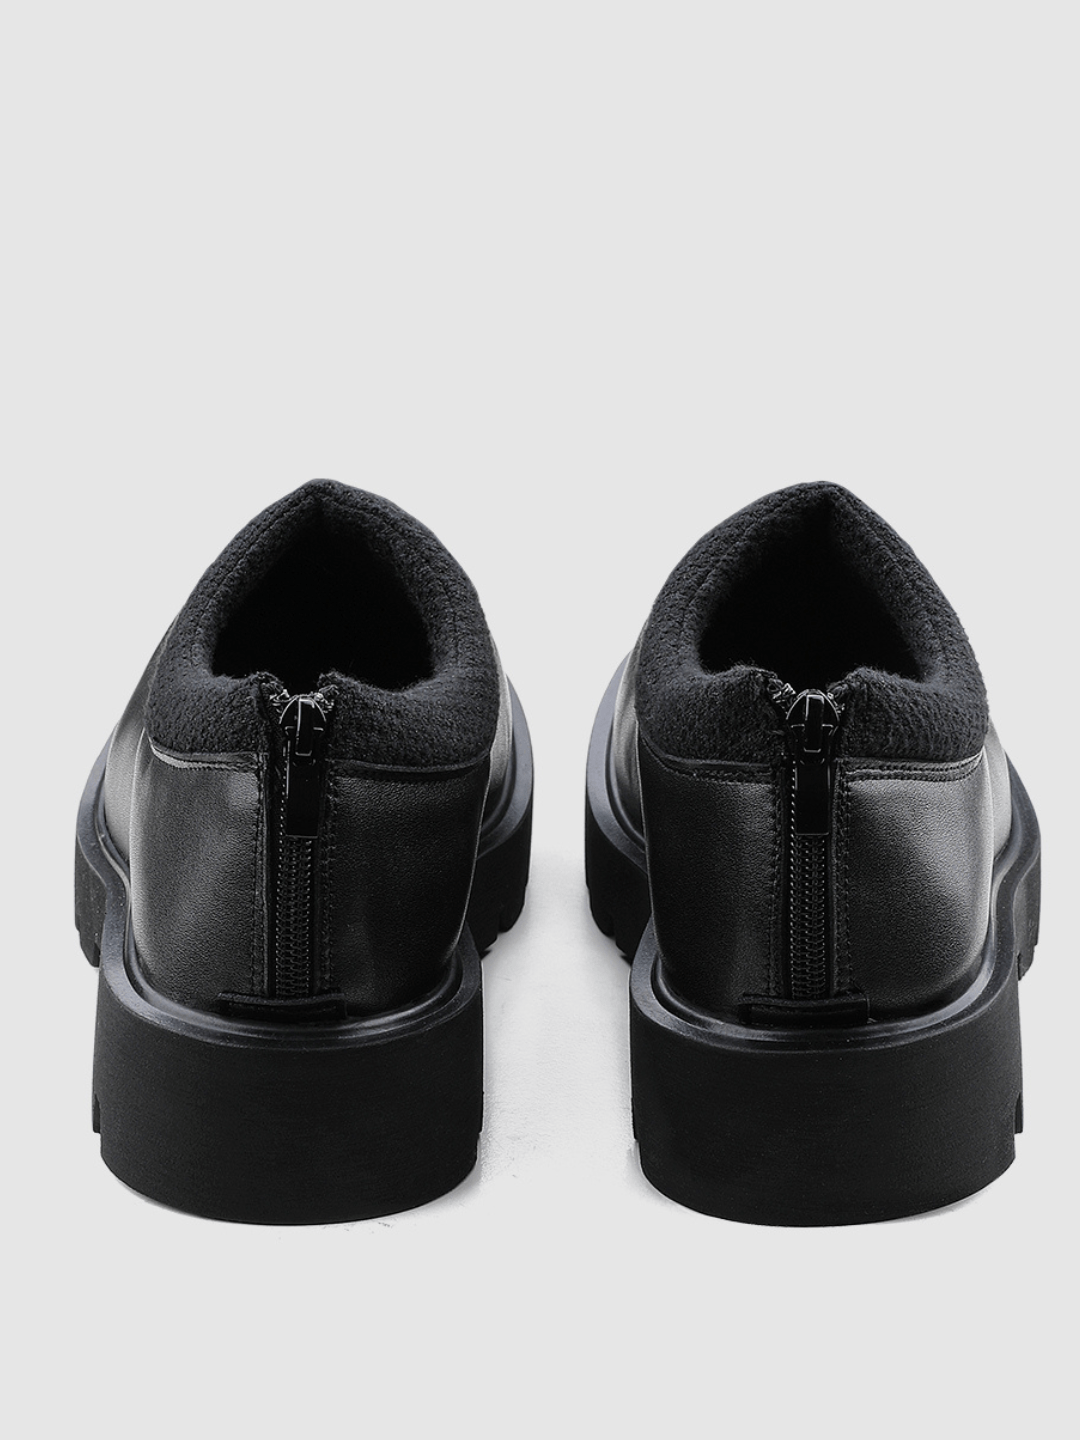 black casual leather shoes na883